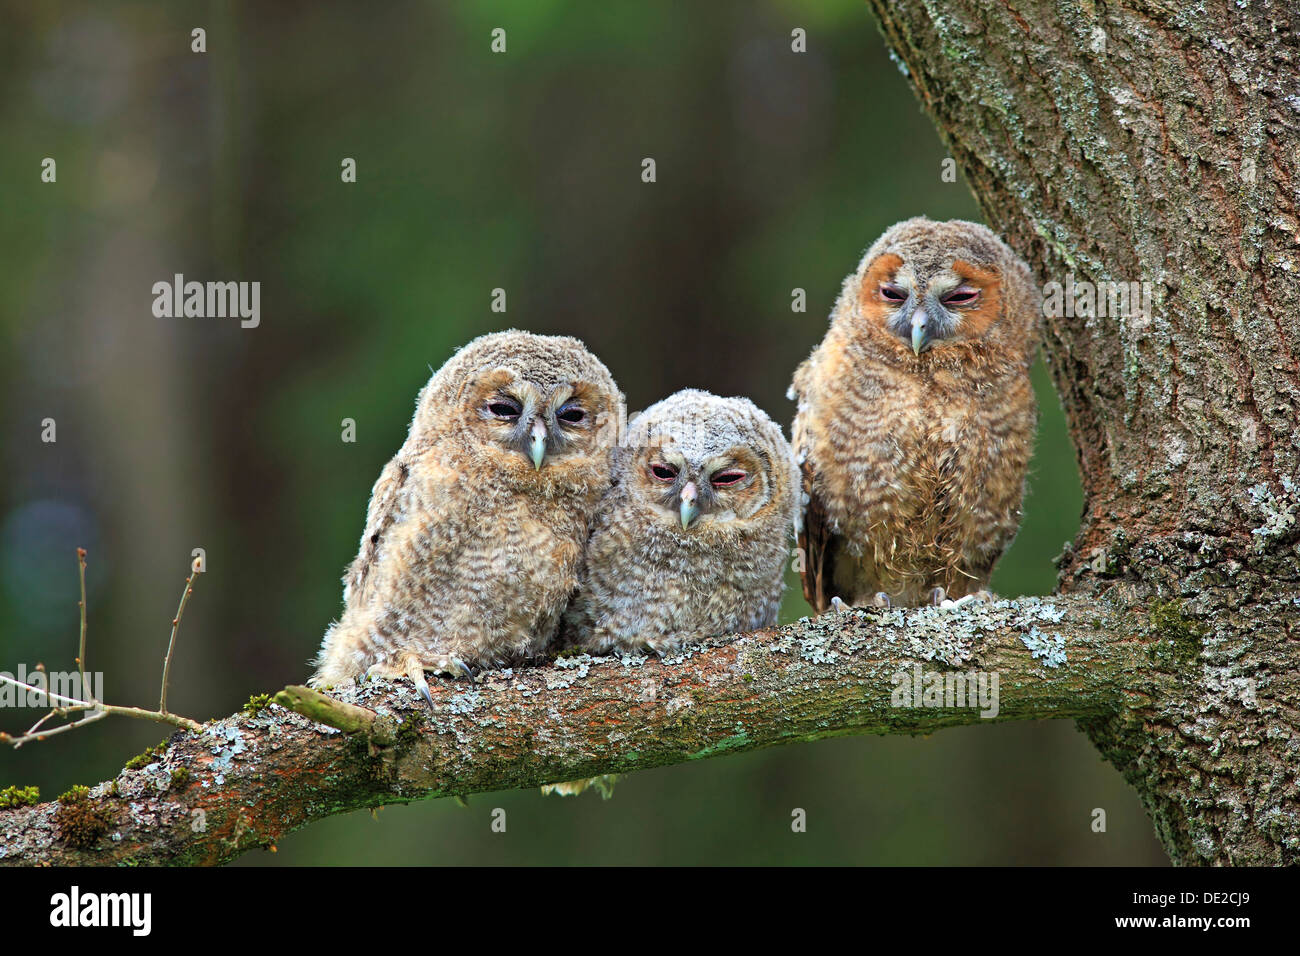 Three young Tawny Owls or Brown Owls (Strix aluco) perched on a tree, Westerwald, Solms, Lahn-Dill Kreis, Hesse, Germany Stock Photo